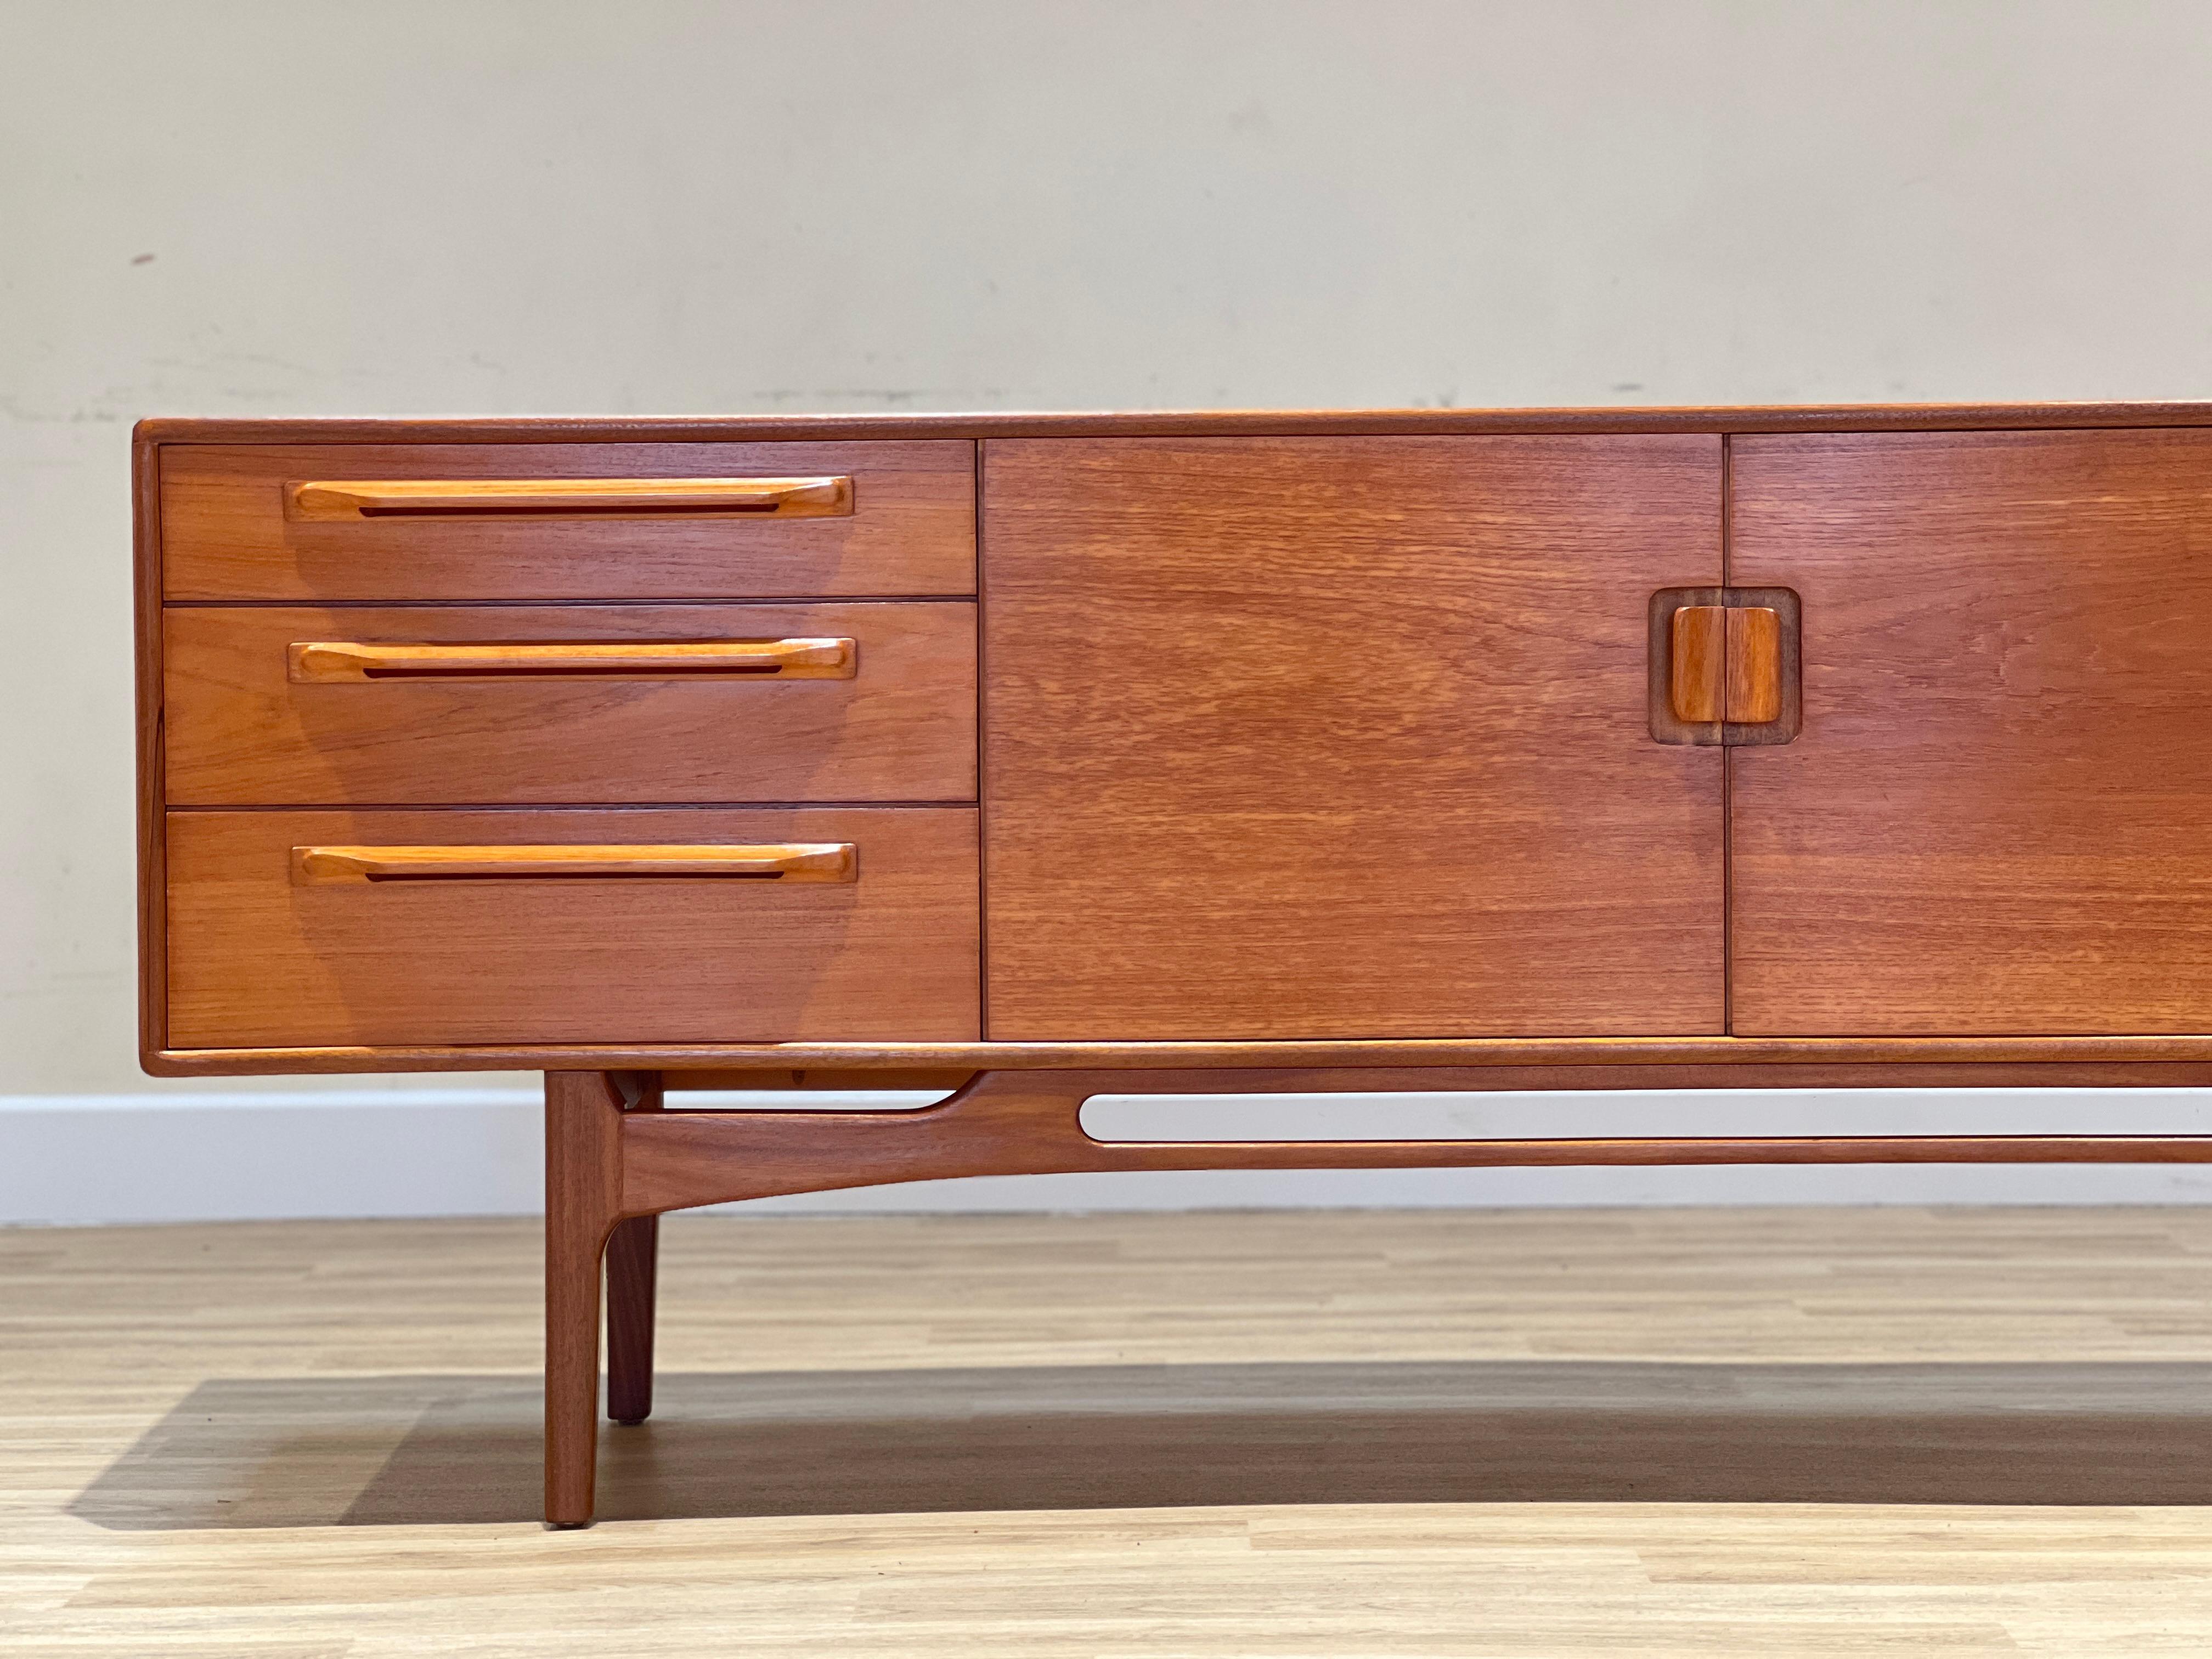 This exquisite teak sideboard was produced in the 1960s by Beithcraft, a renowned Scottish furniture manufacturer, known for their exceptional quality. The design of this piece was heavily influenced by the Danish furniture makers of that era.

The